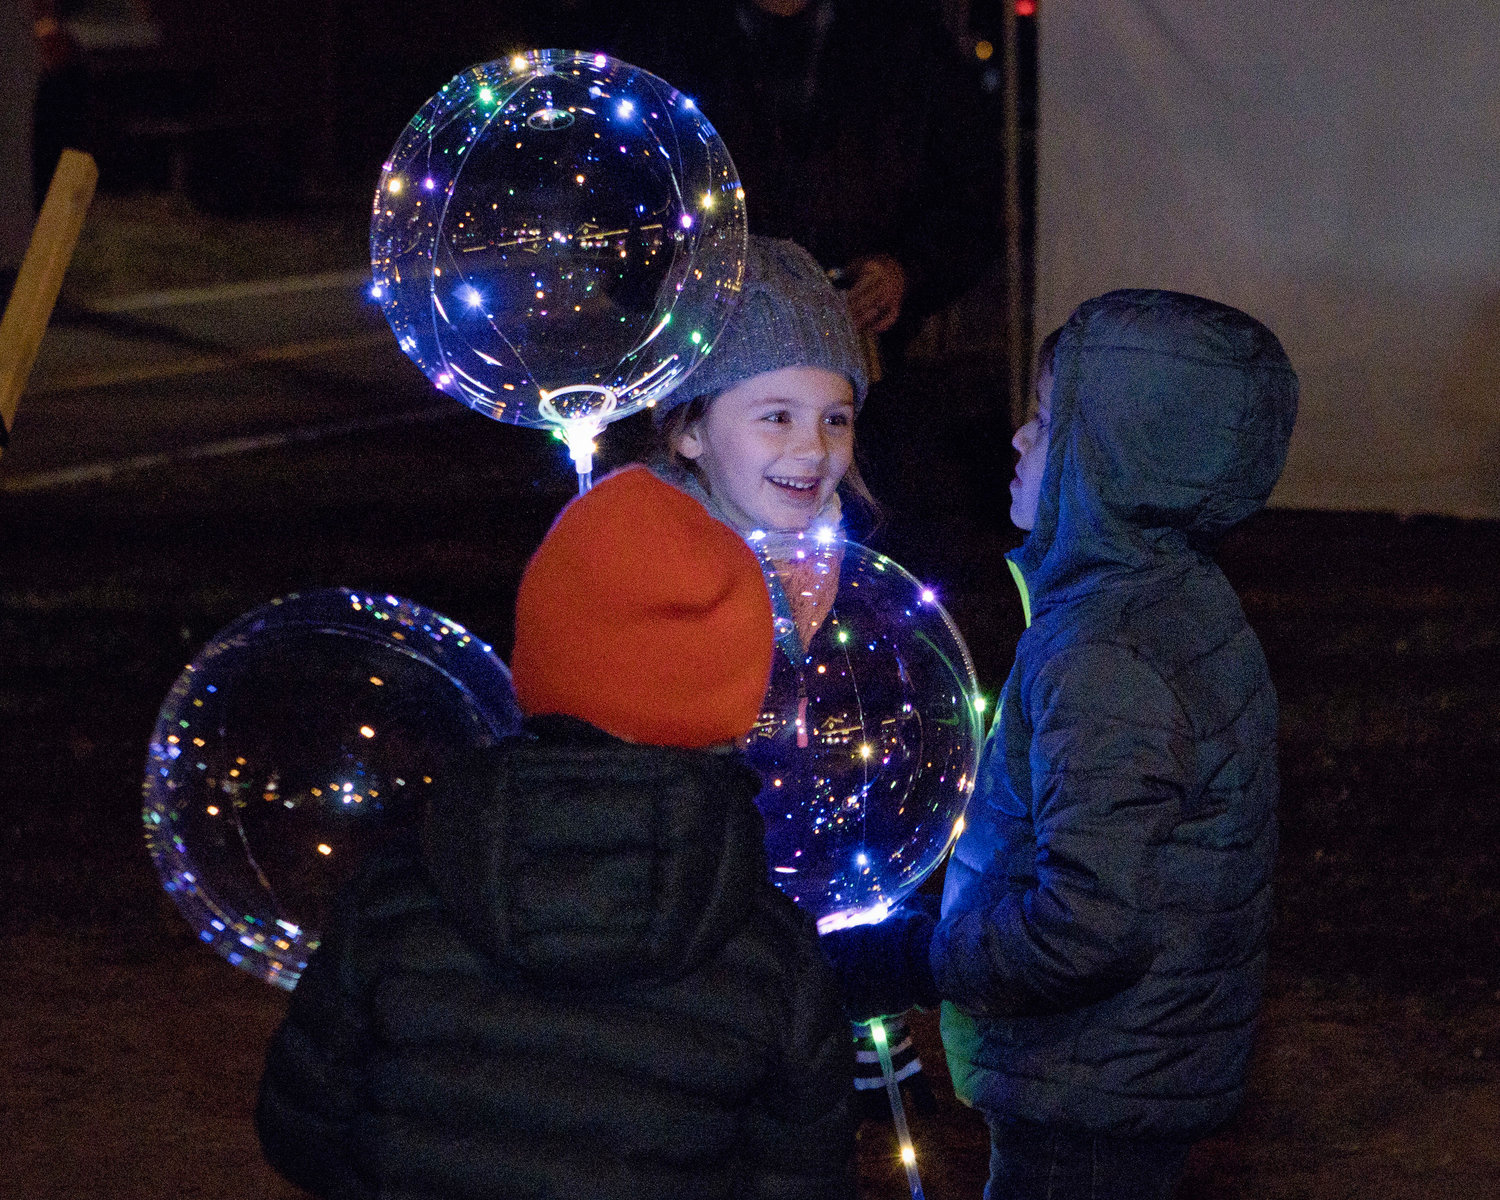 Jane Harding plays with her brother, Jack (orange hat), and friend, Abdiel Lugo while awaiting the lighting of the Riverside Renaissance Movement Tree, Friday, Dec. 3.